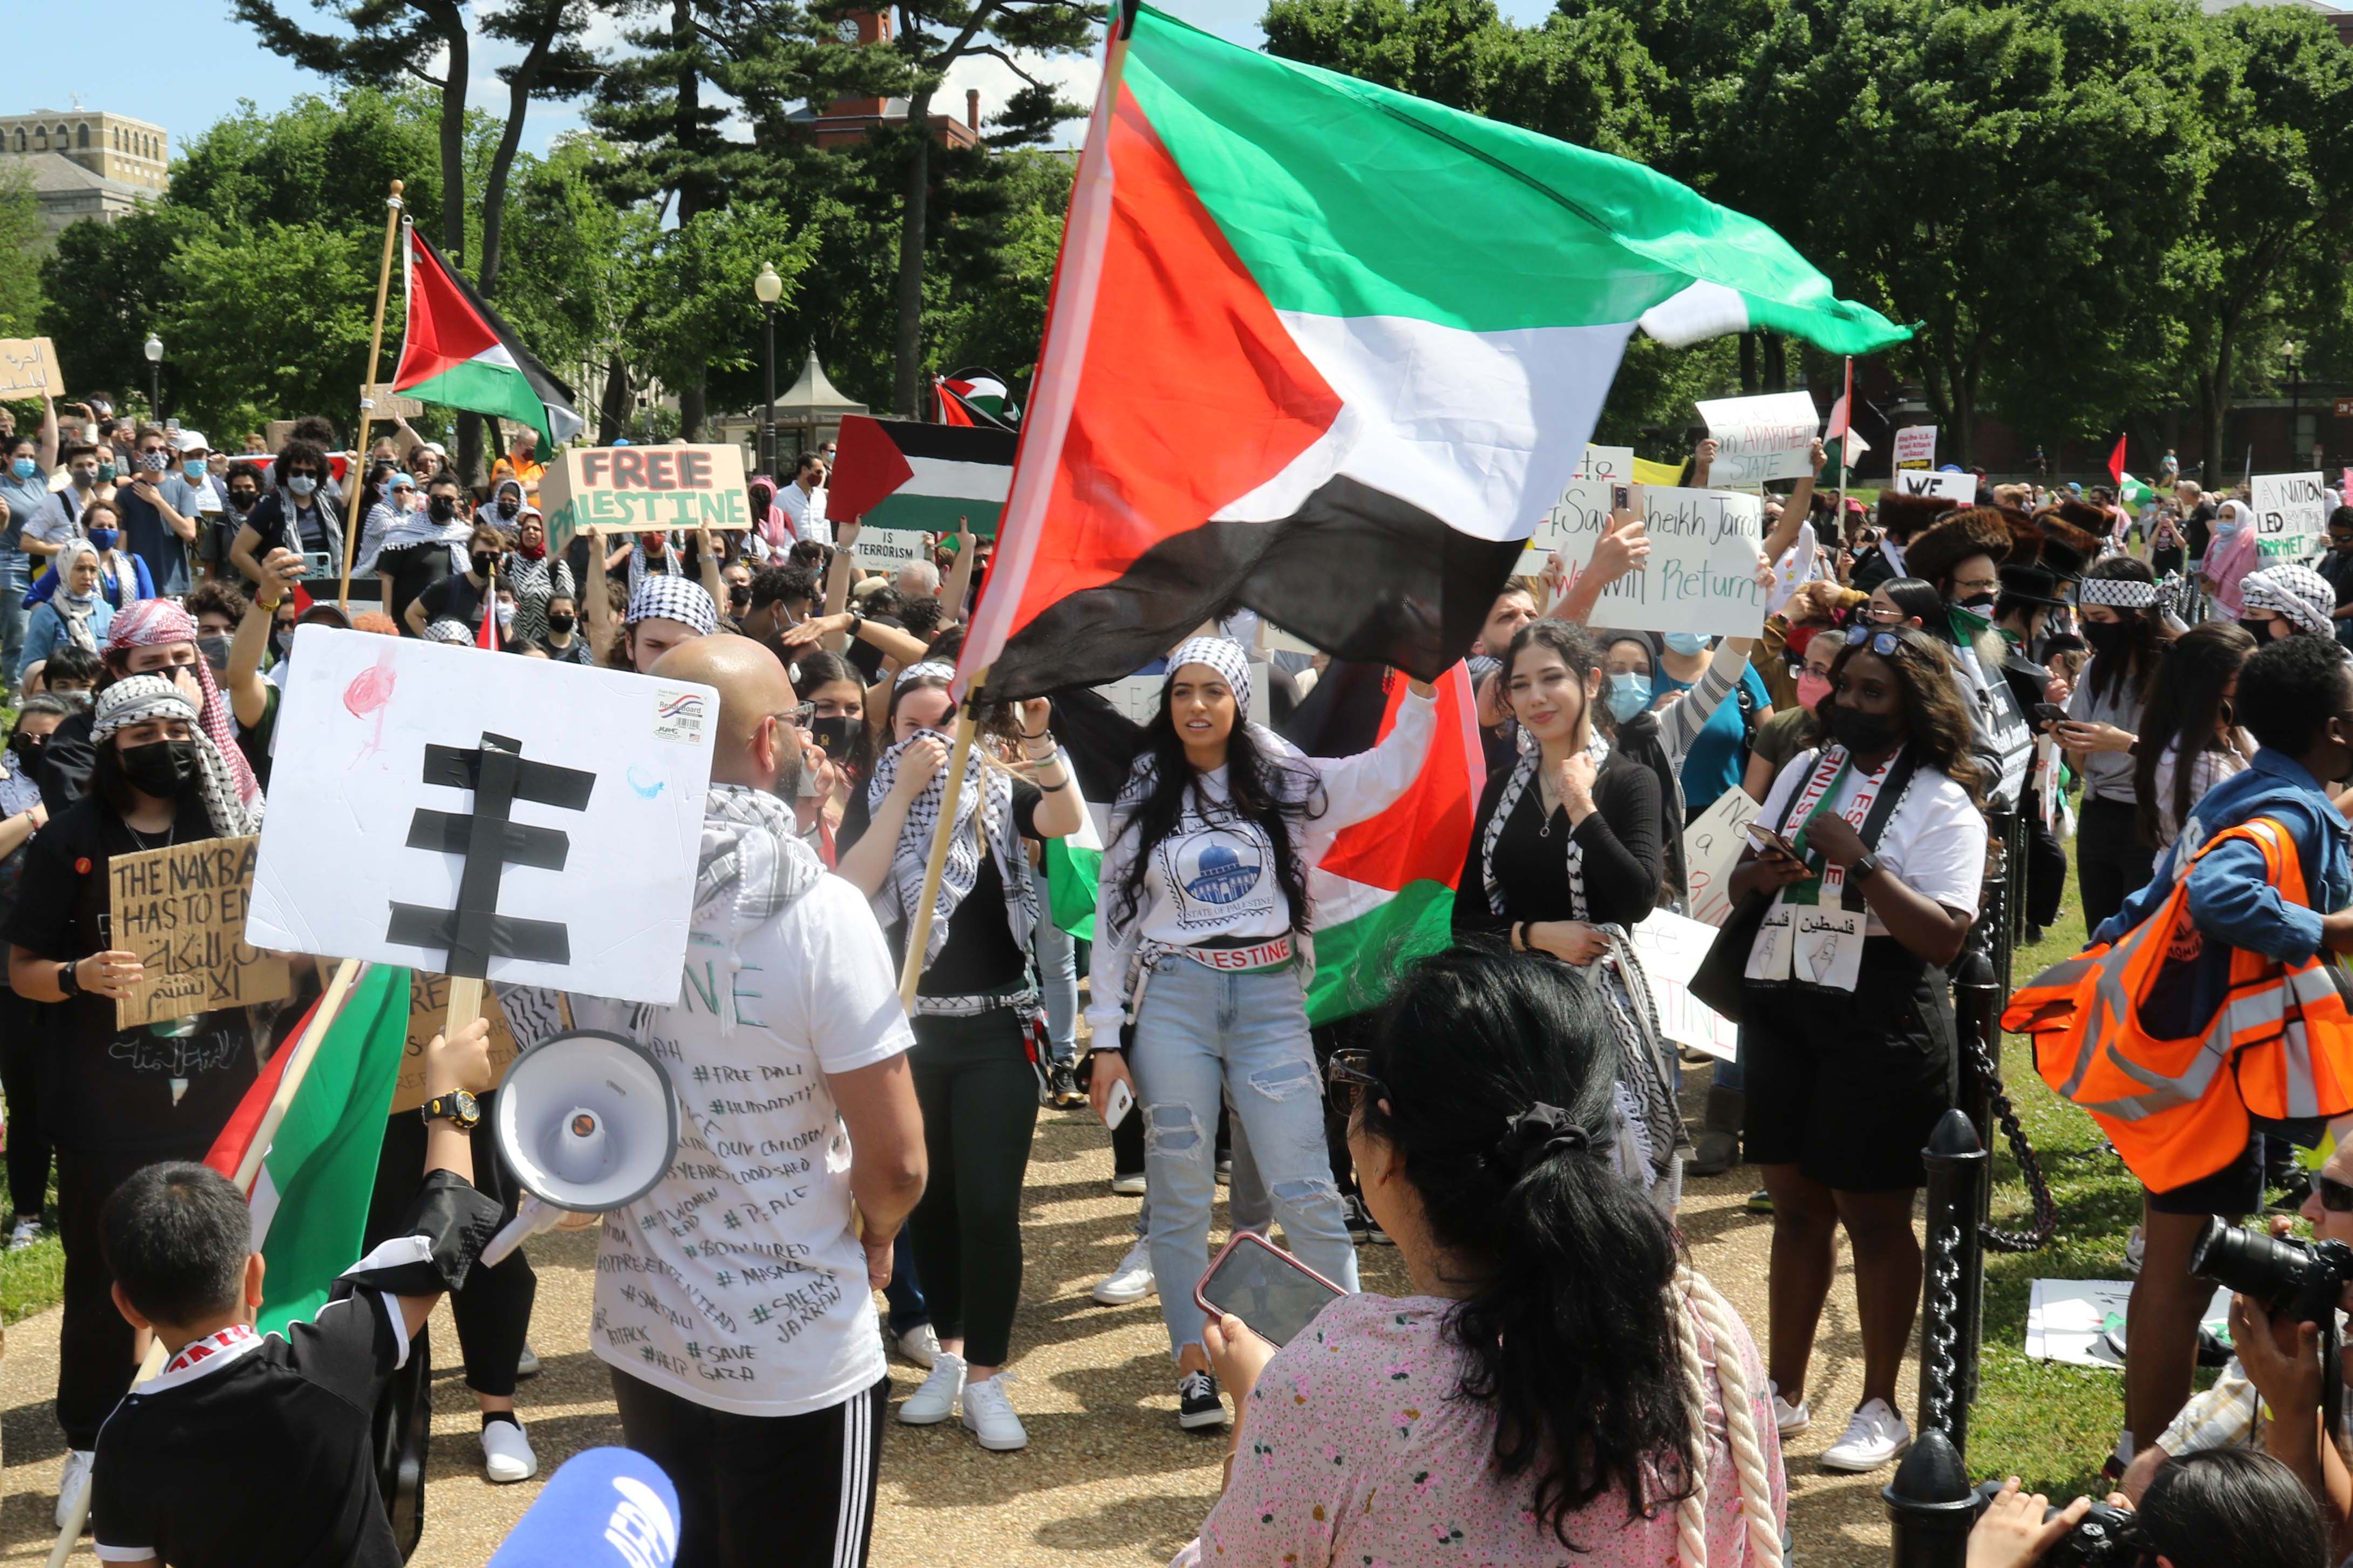 A protester rallies the crowd with chants calling for "Free Palestine" and an end to the Israeli occupation of Palestinian territories.